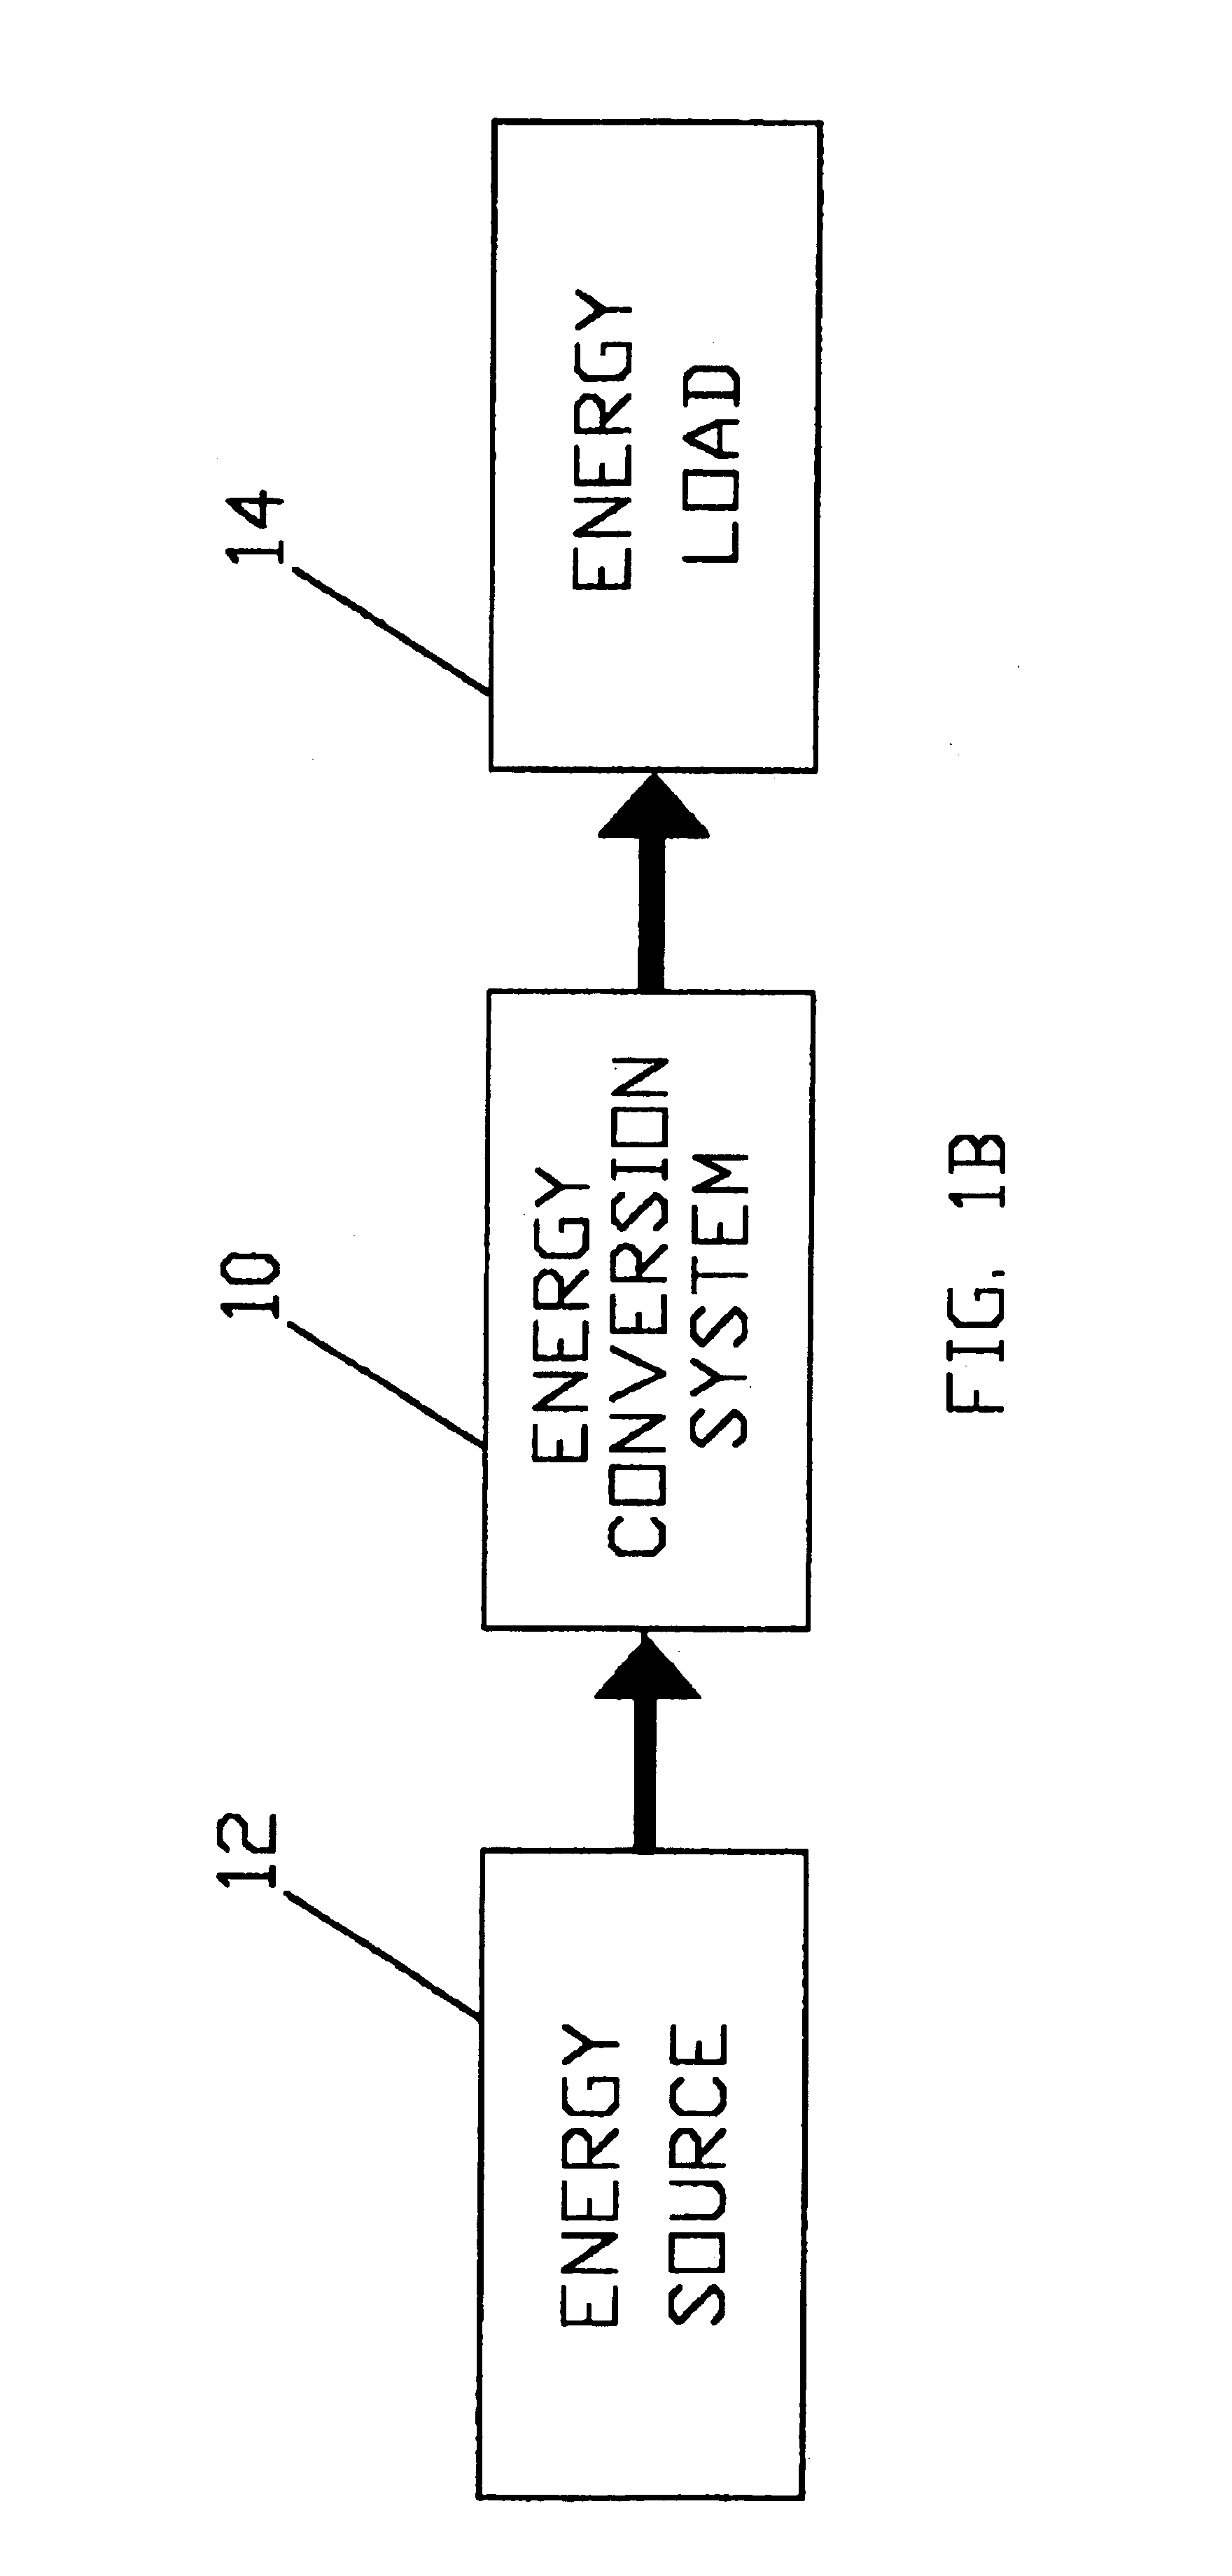 Electro-mechanical energy conversion system having a permanent magnet machine with stator, resonant transfer link and energy converter controls